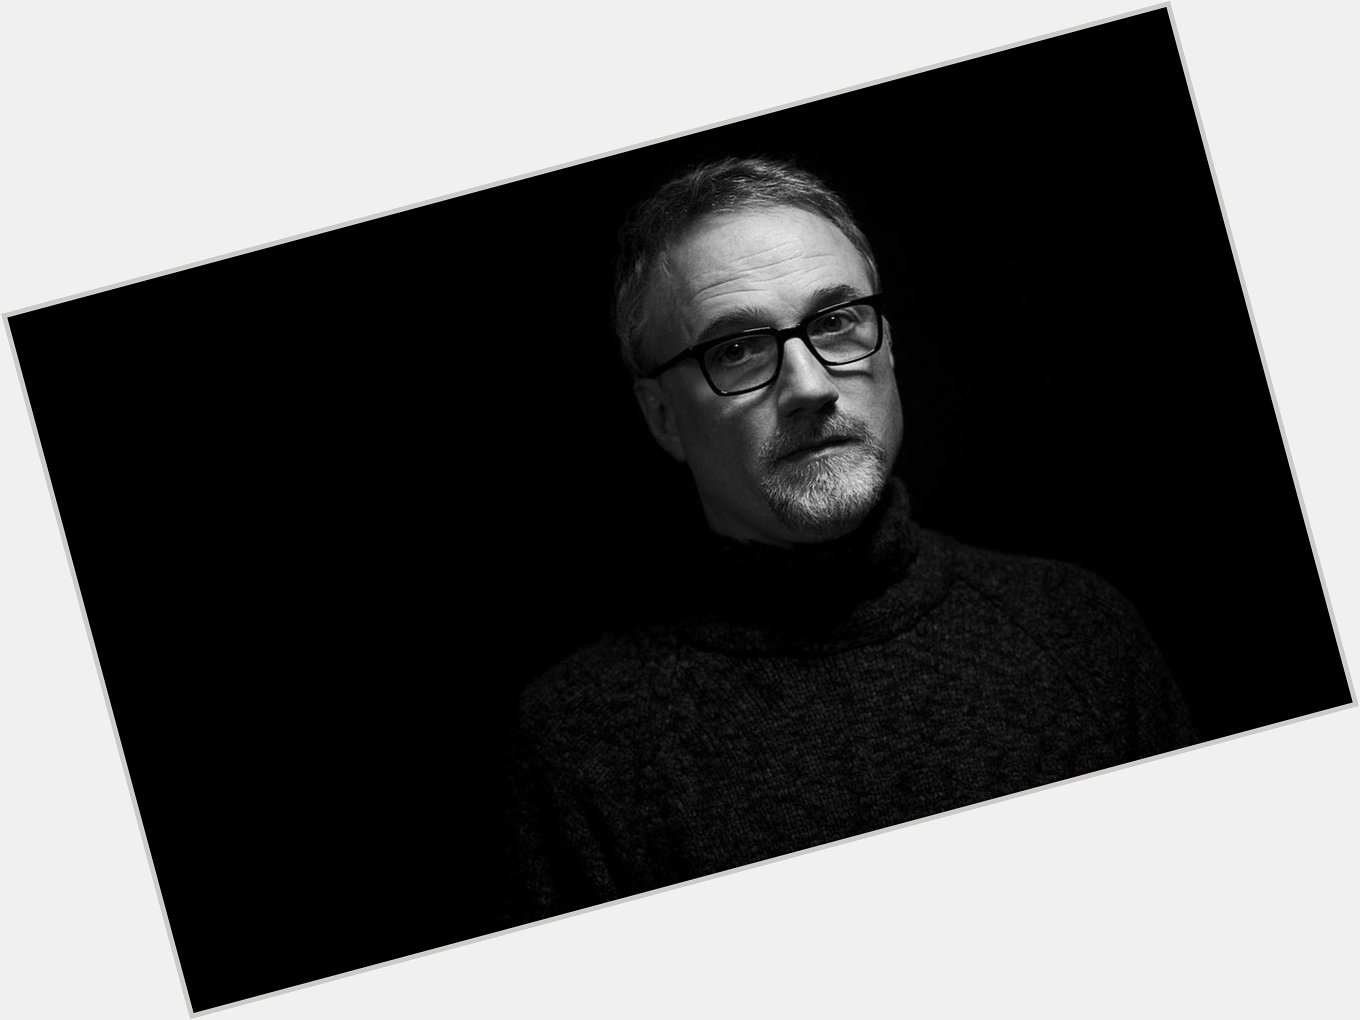 Happy birthday to David Fincher! 

My top 5:
The Social Network
Zodiac
Seven
Gone Girl
Girl with the Dragon Tattoo 